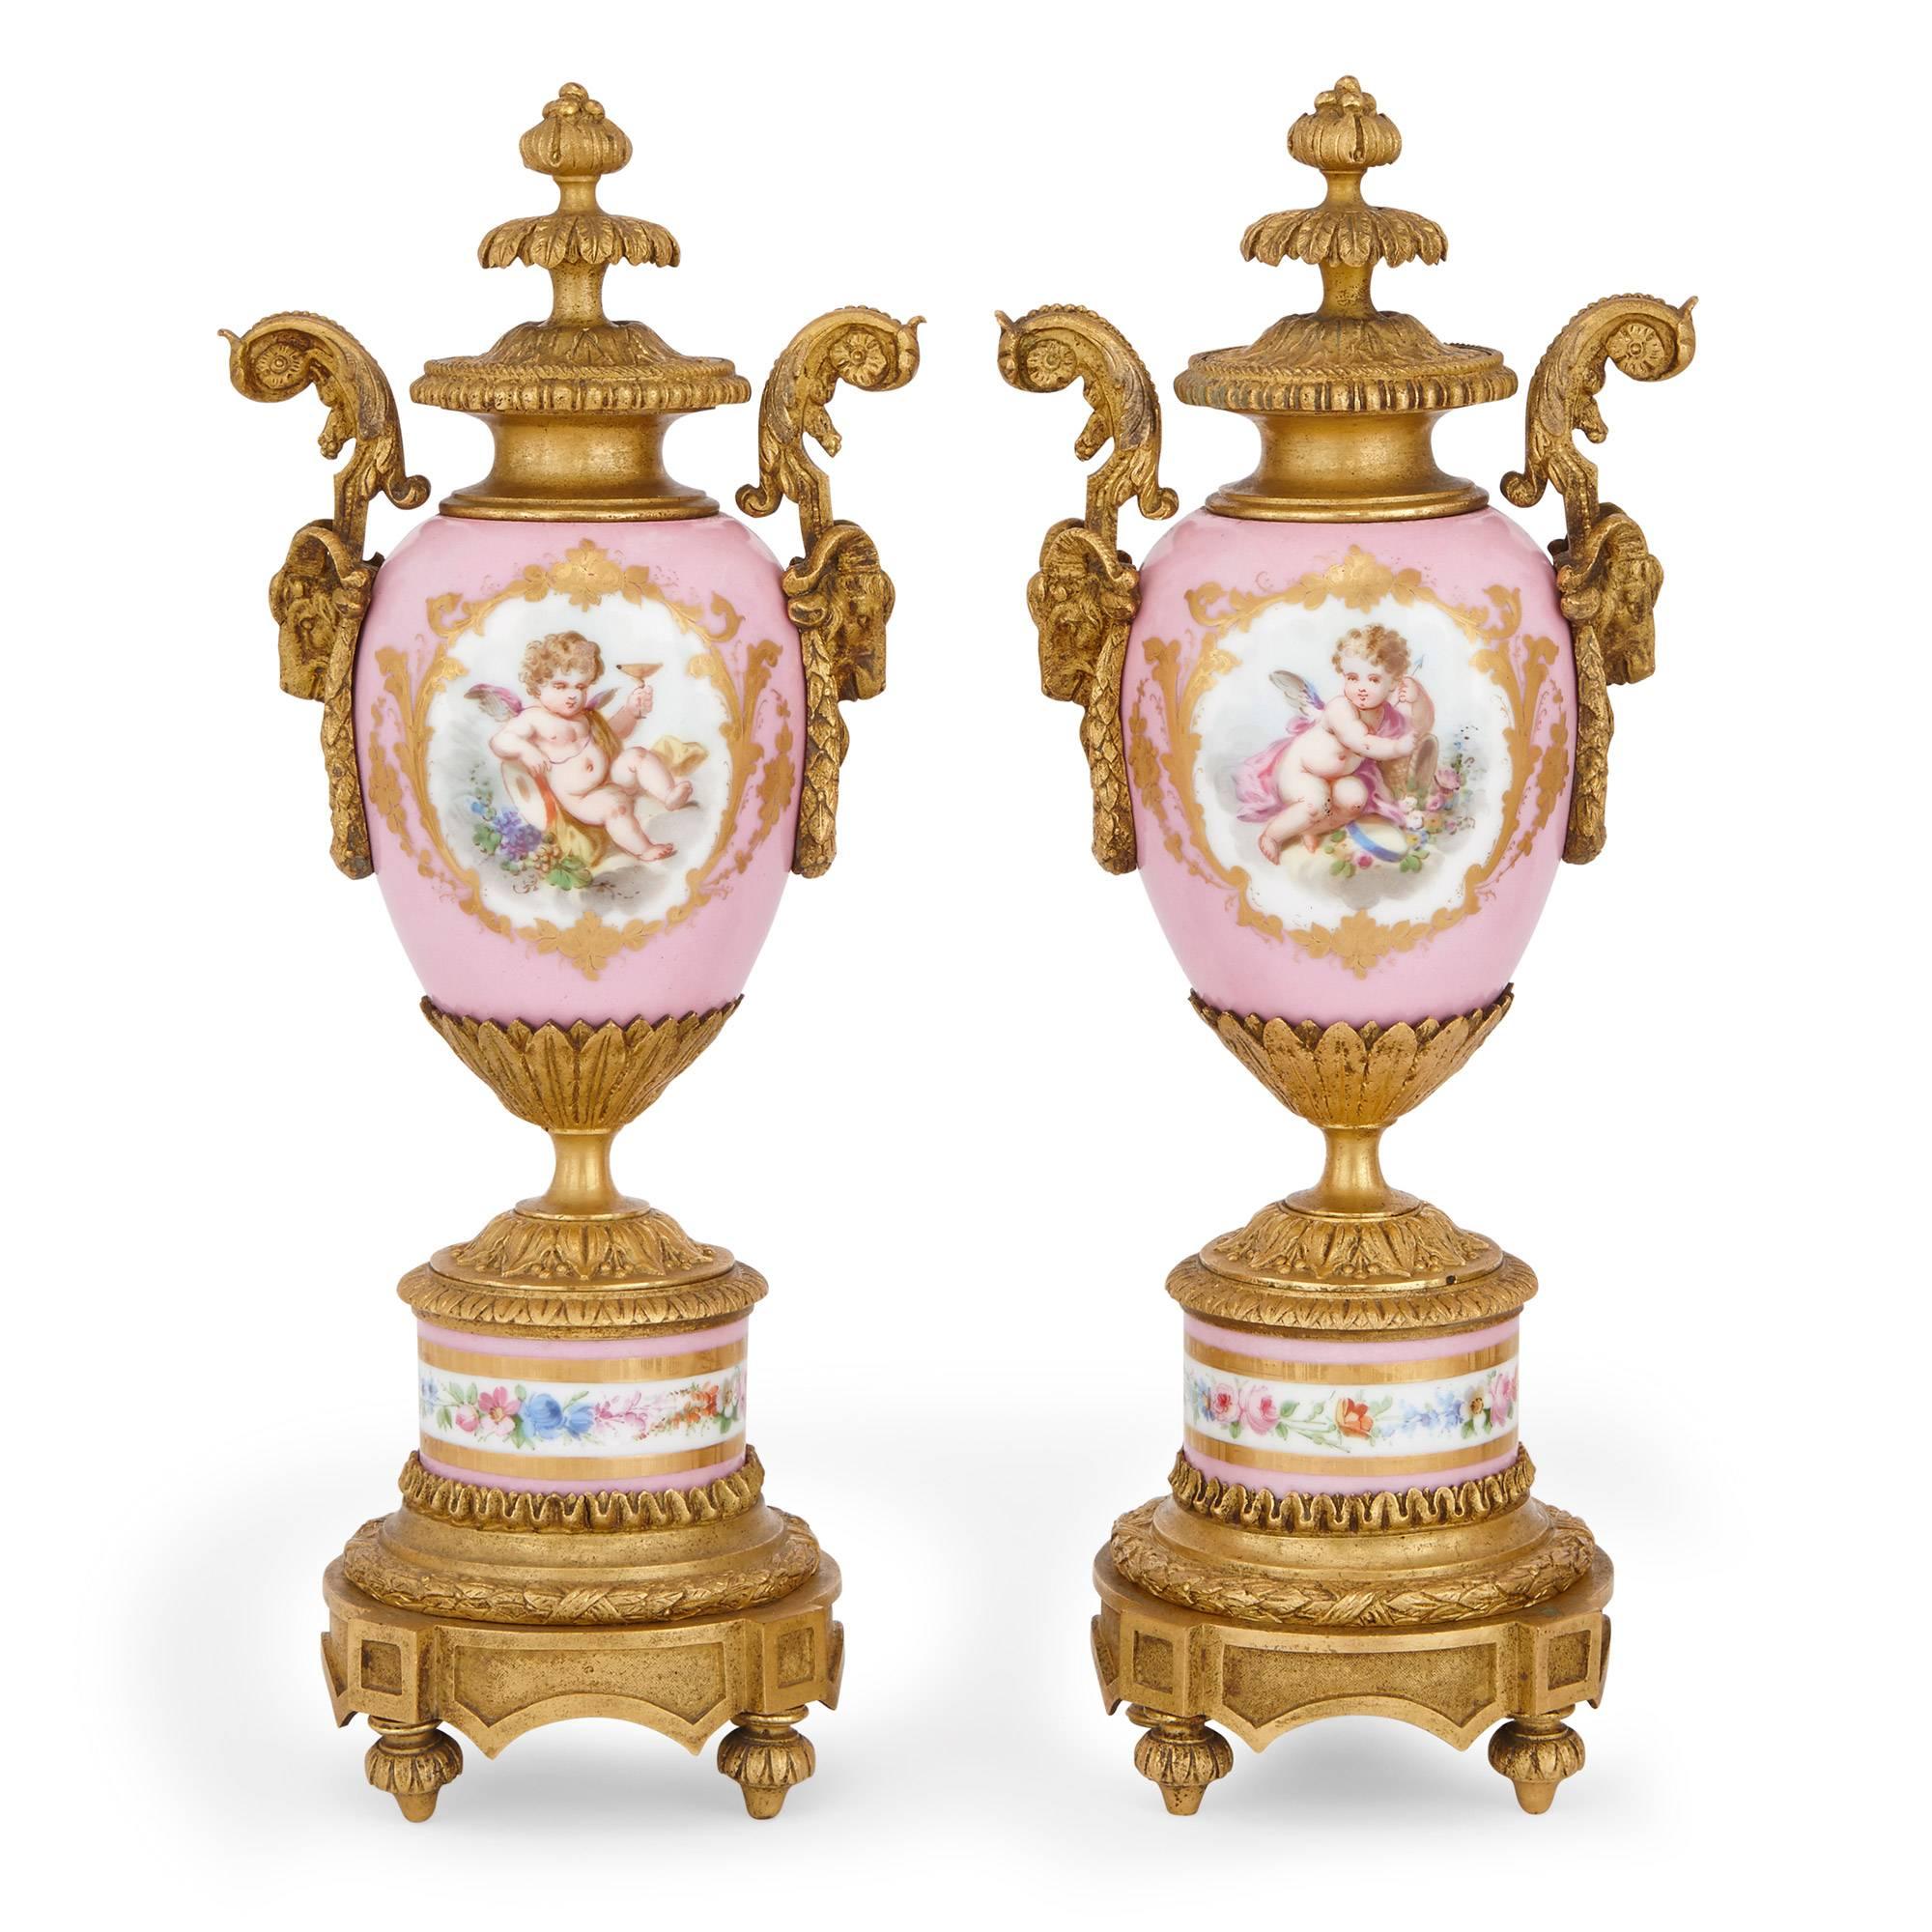 This exquisite pink porcelain clock set is made in the Louis XVI style and comprises of two vases flanking a central clock. The porcelain clock dial is delicately painted and bears a faded signature of 'Arthur Jack / Paris & Cheltenham.', and is